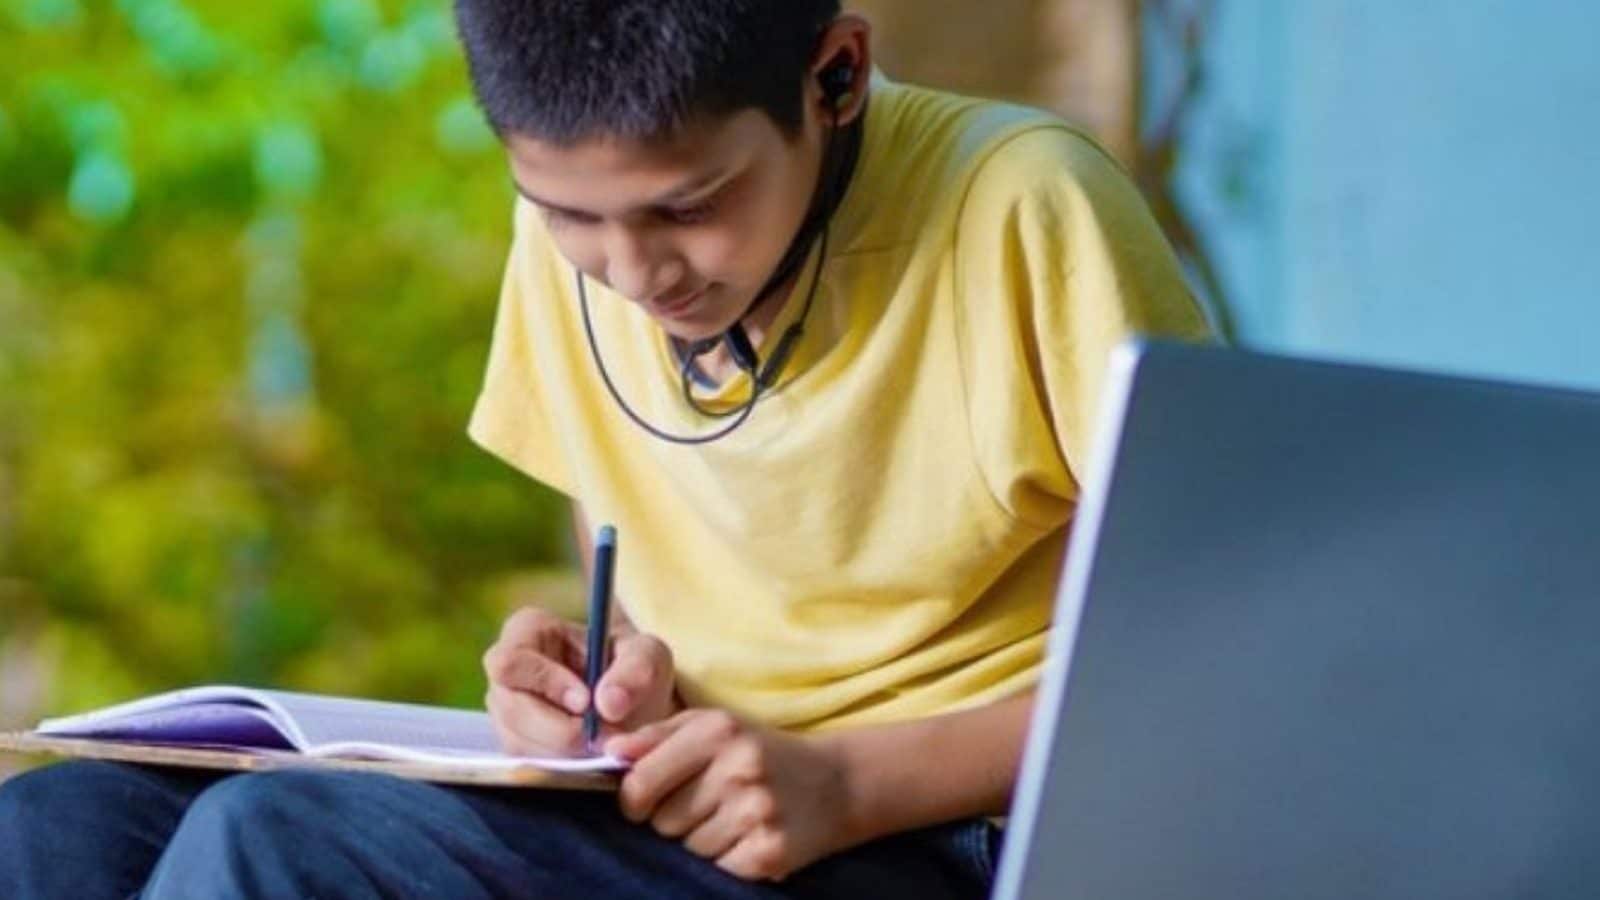 Great Becomes Gr8, U Instead of You, Kids Use Internet Language to Write Copies, Teachers Concerned